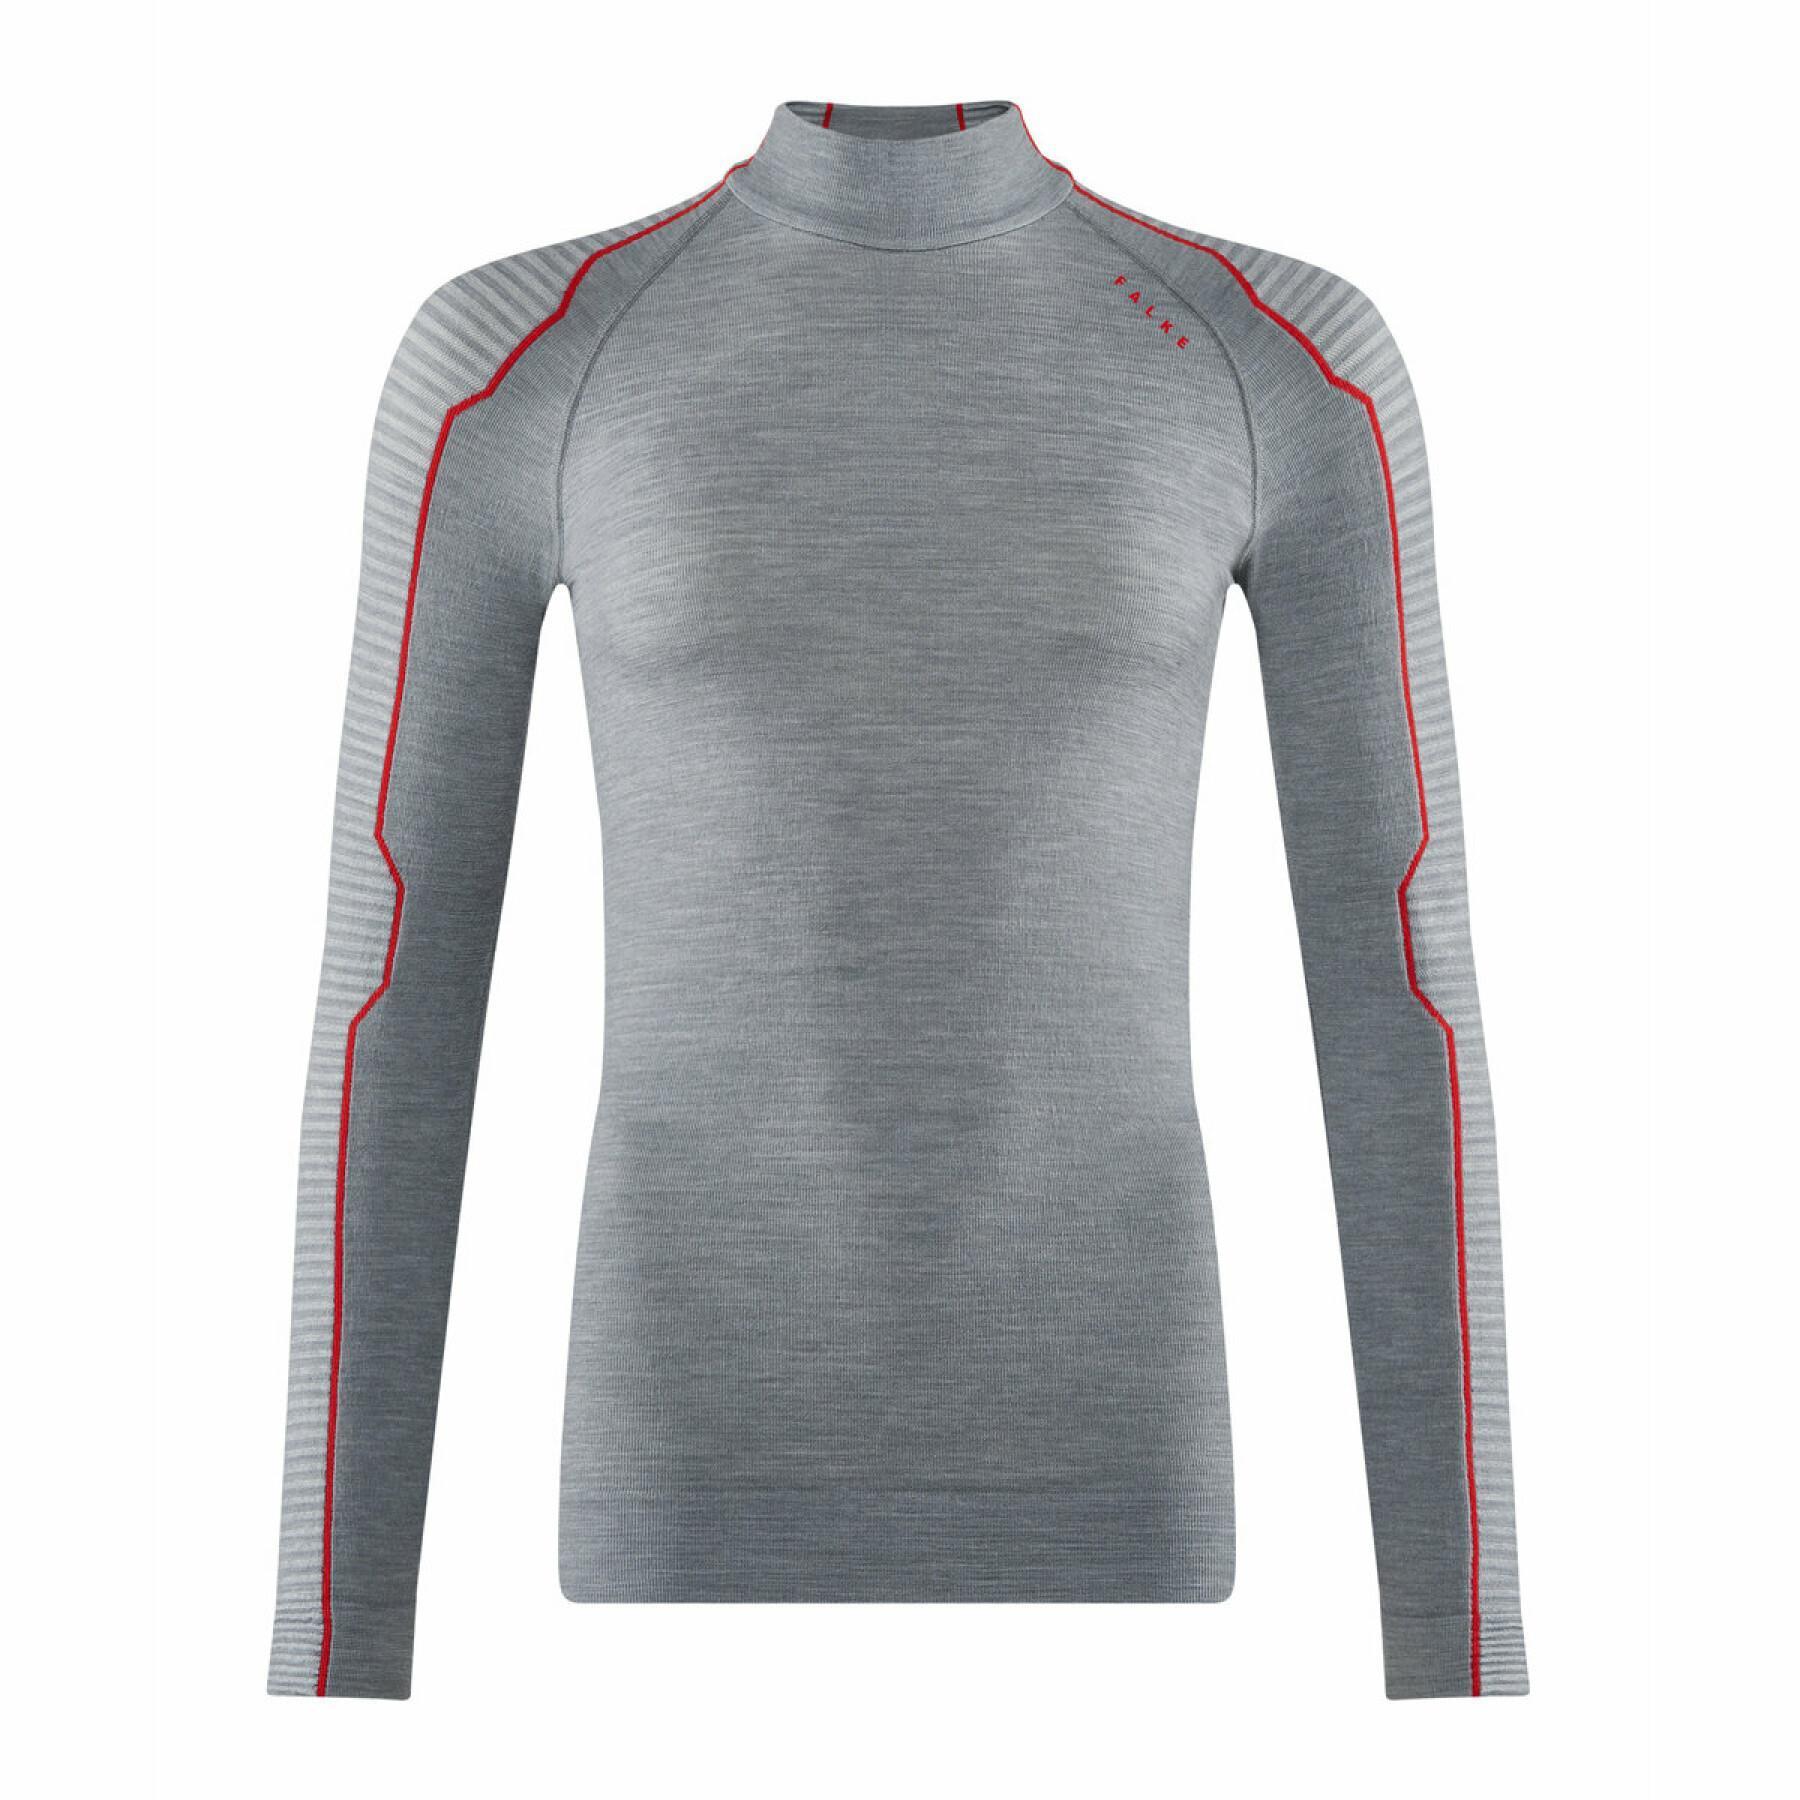 Maillot femme Trend manches longues Wool-Tech